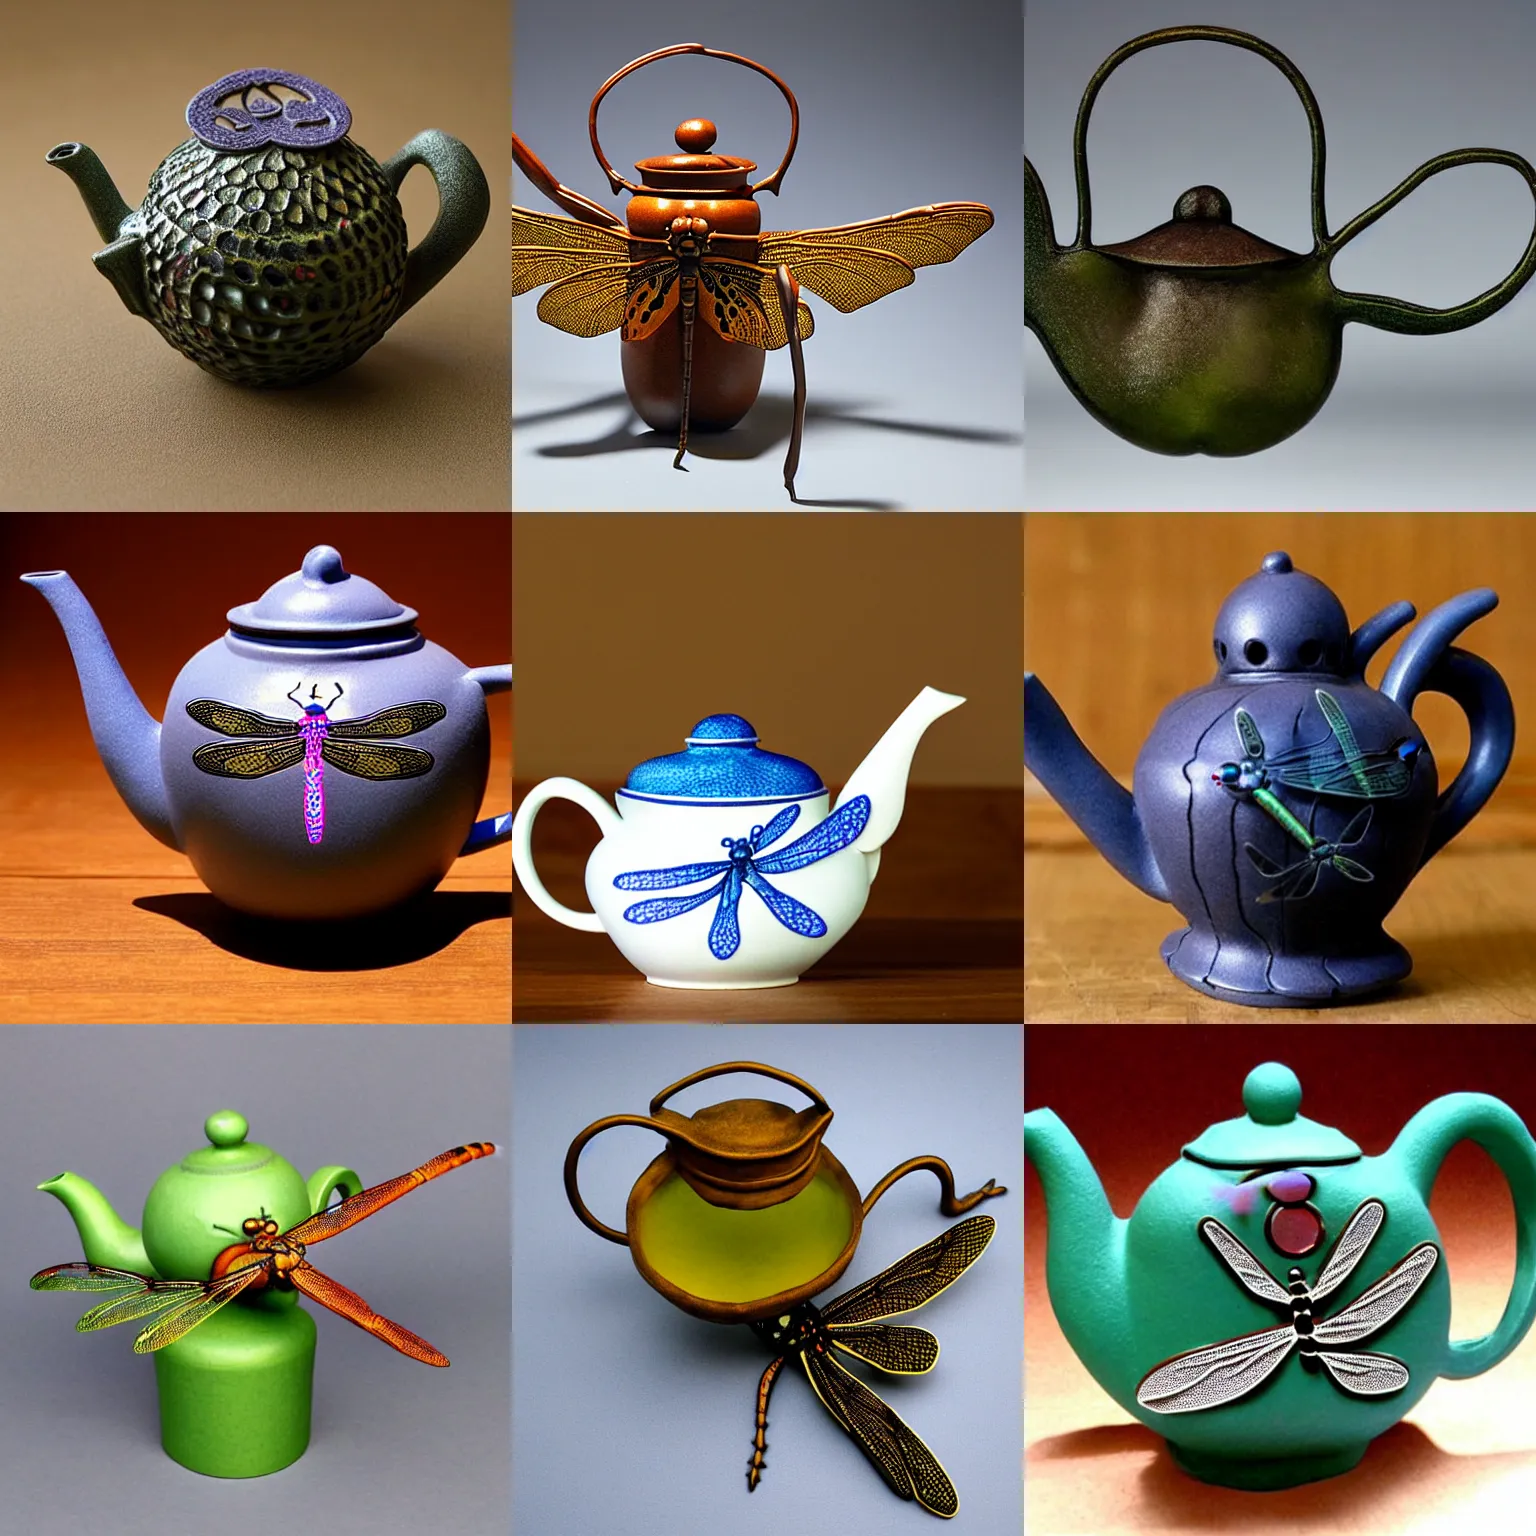 Prompt: Dragonfly-shaped, dragonfly-like, a bespoke dragonfly-formed teapot in the shape of a dragonfly, that looks like a dragonfly, that has the form of a dragonfly, dragonfly-shaped